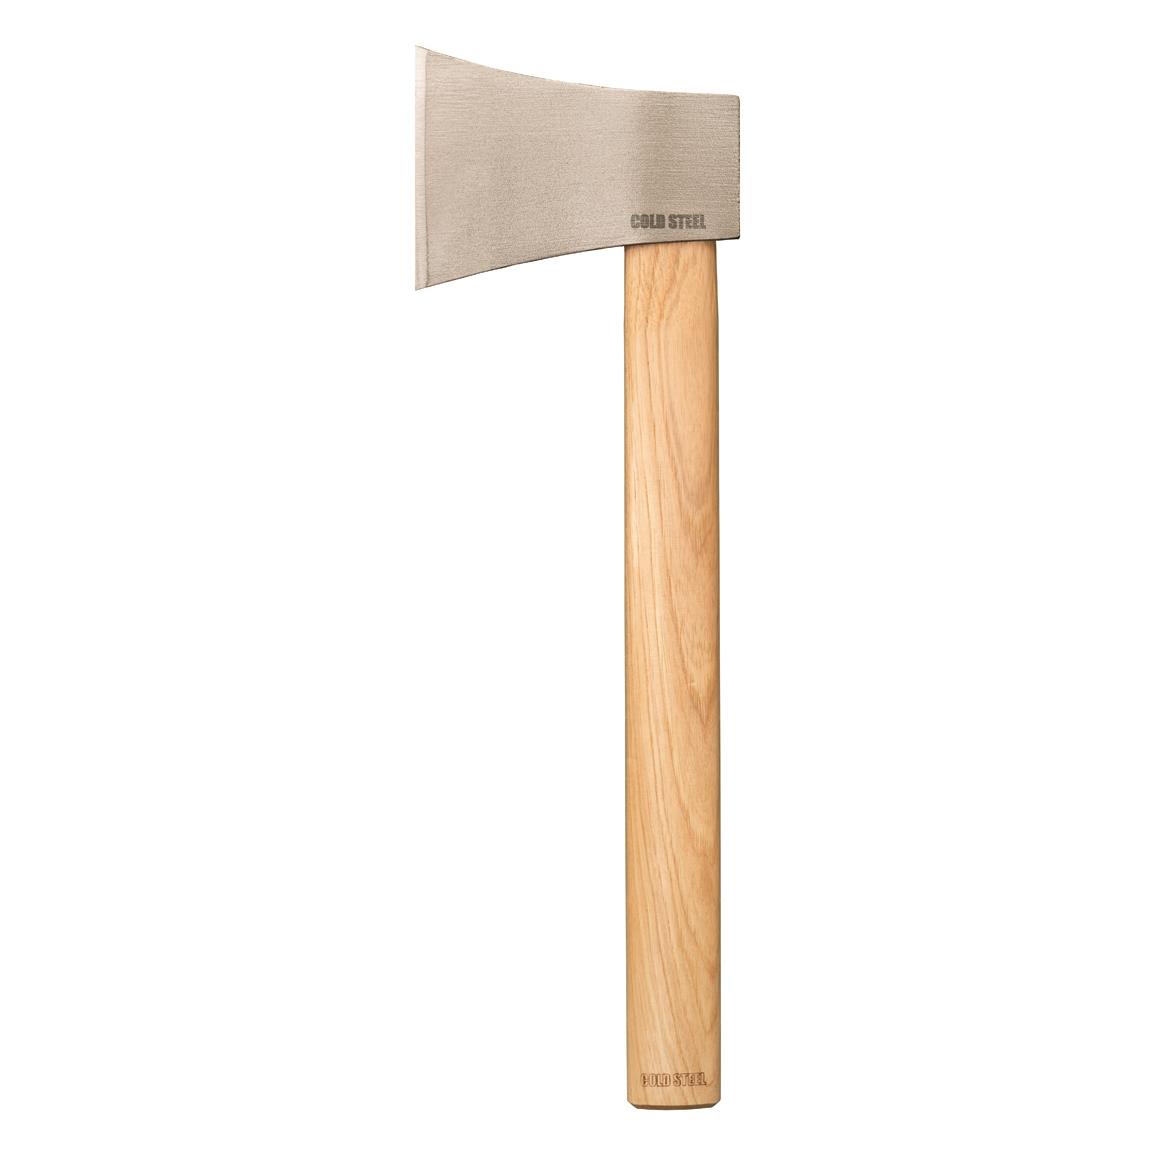 Cold Steel 16" Competition Throwing Hatchet